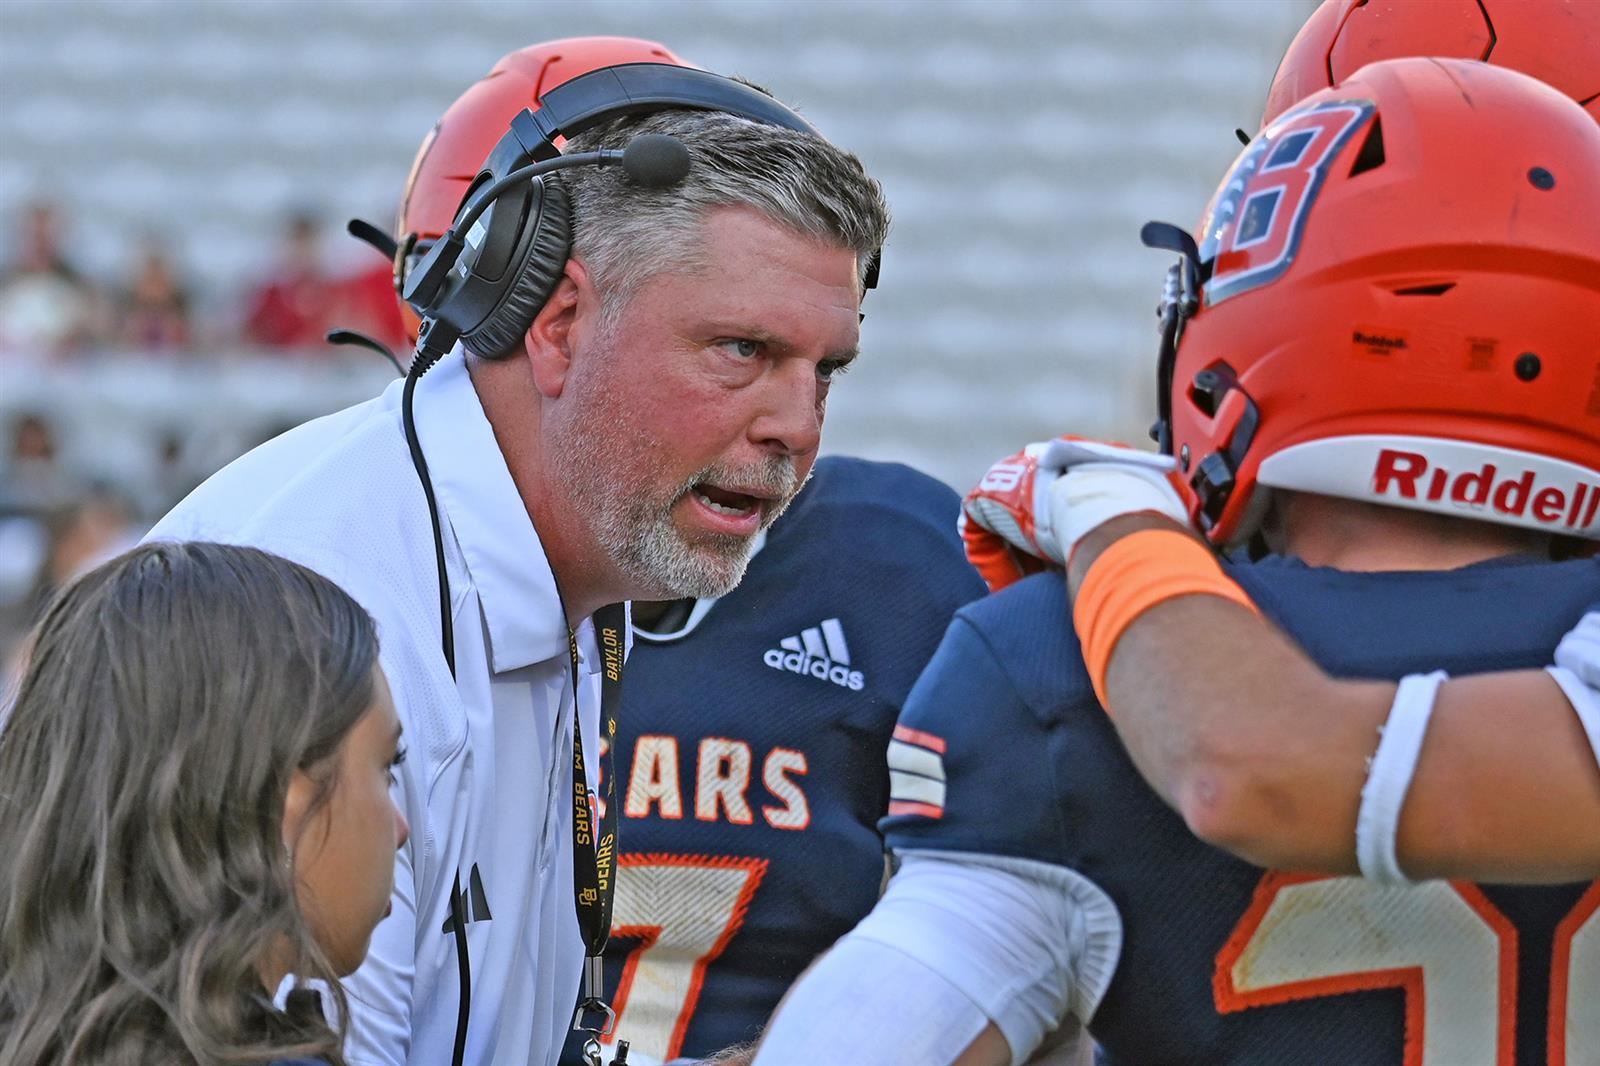 Bridgeland High School Head Football Lonnie Madison was voted the District 16-6A Coach of the Year.